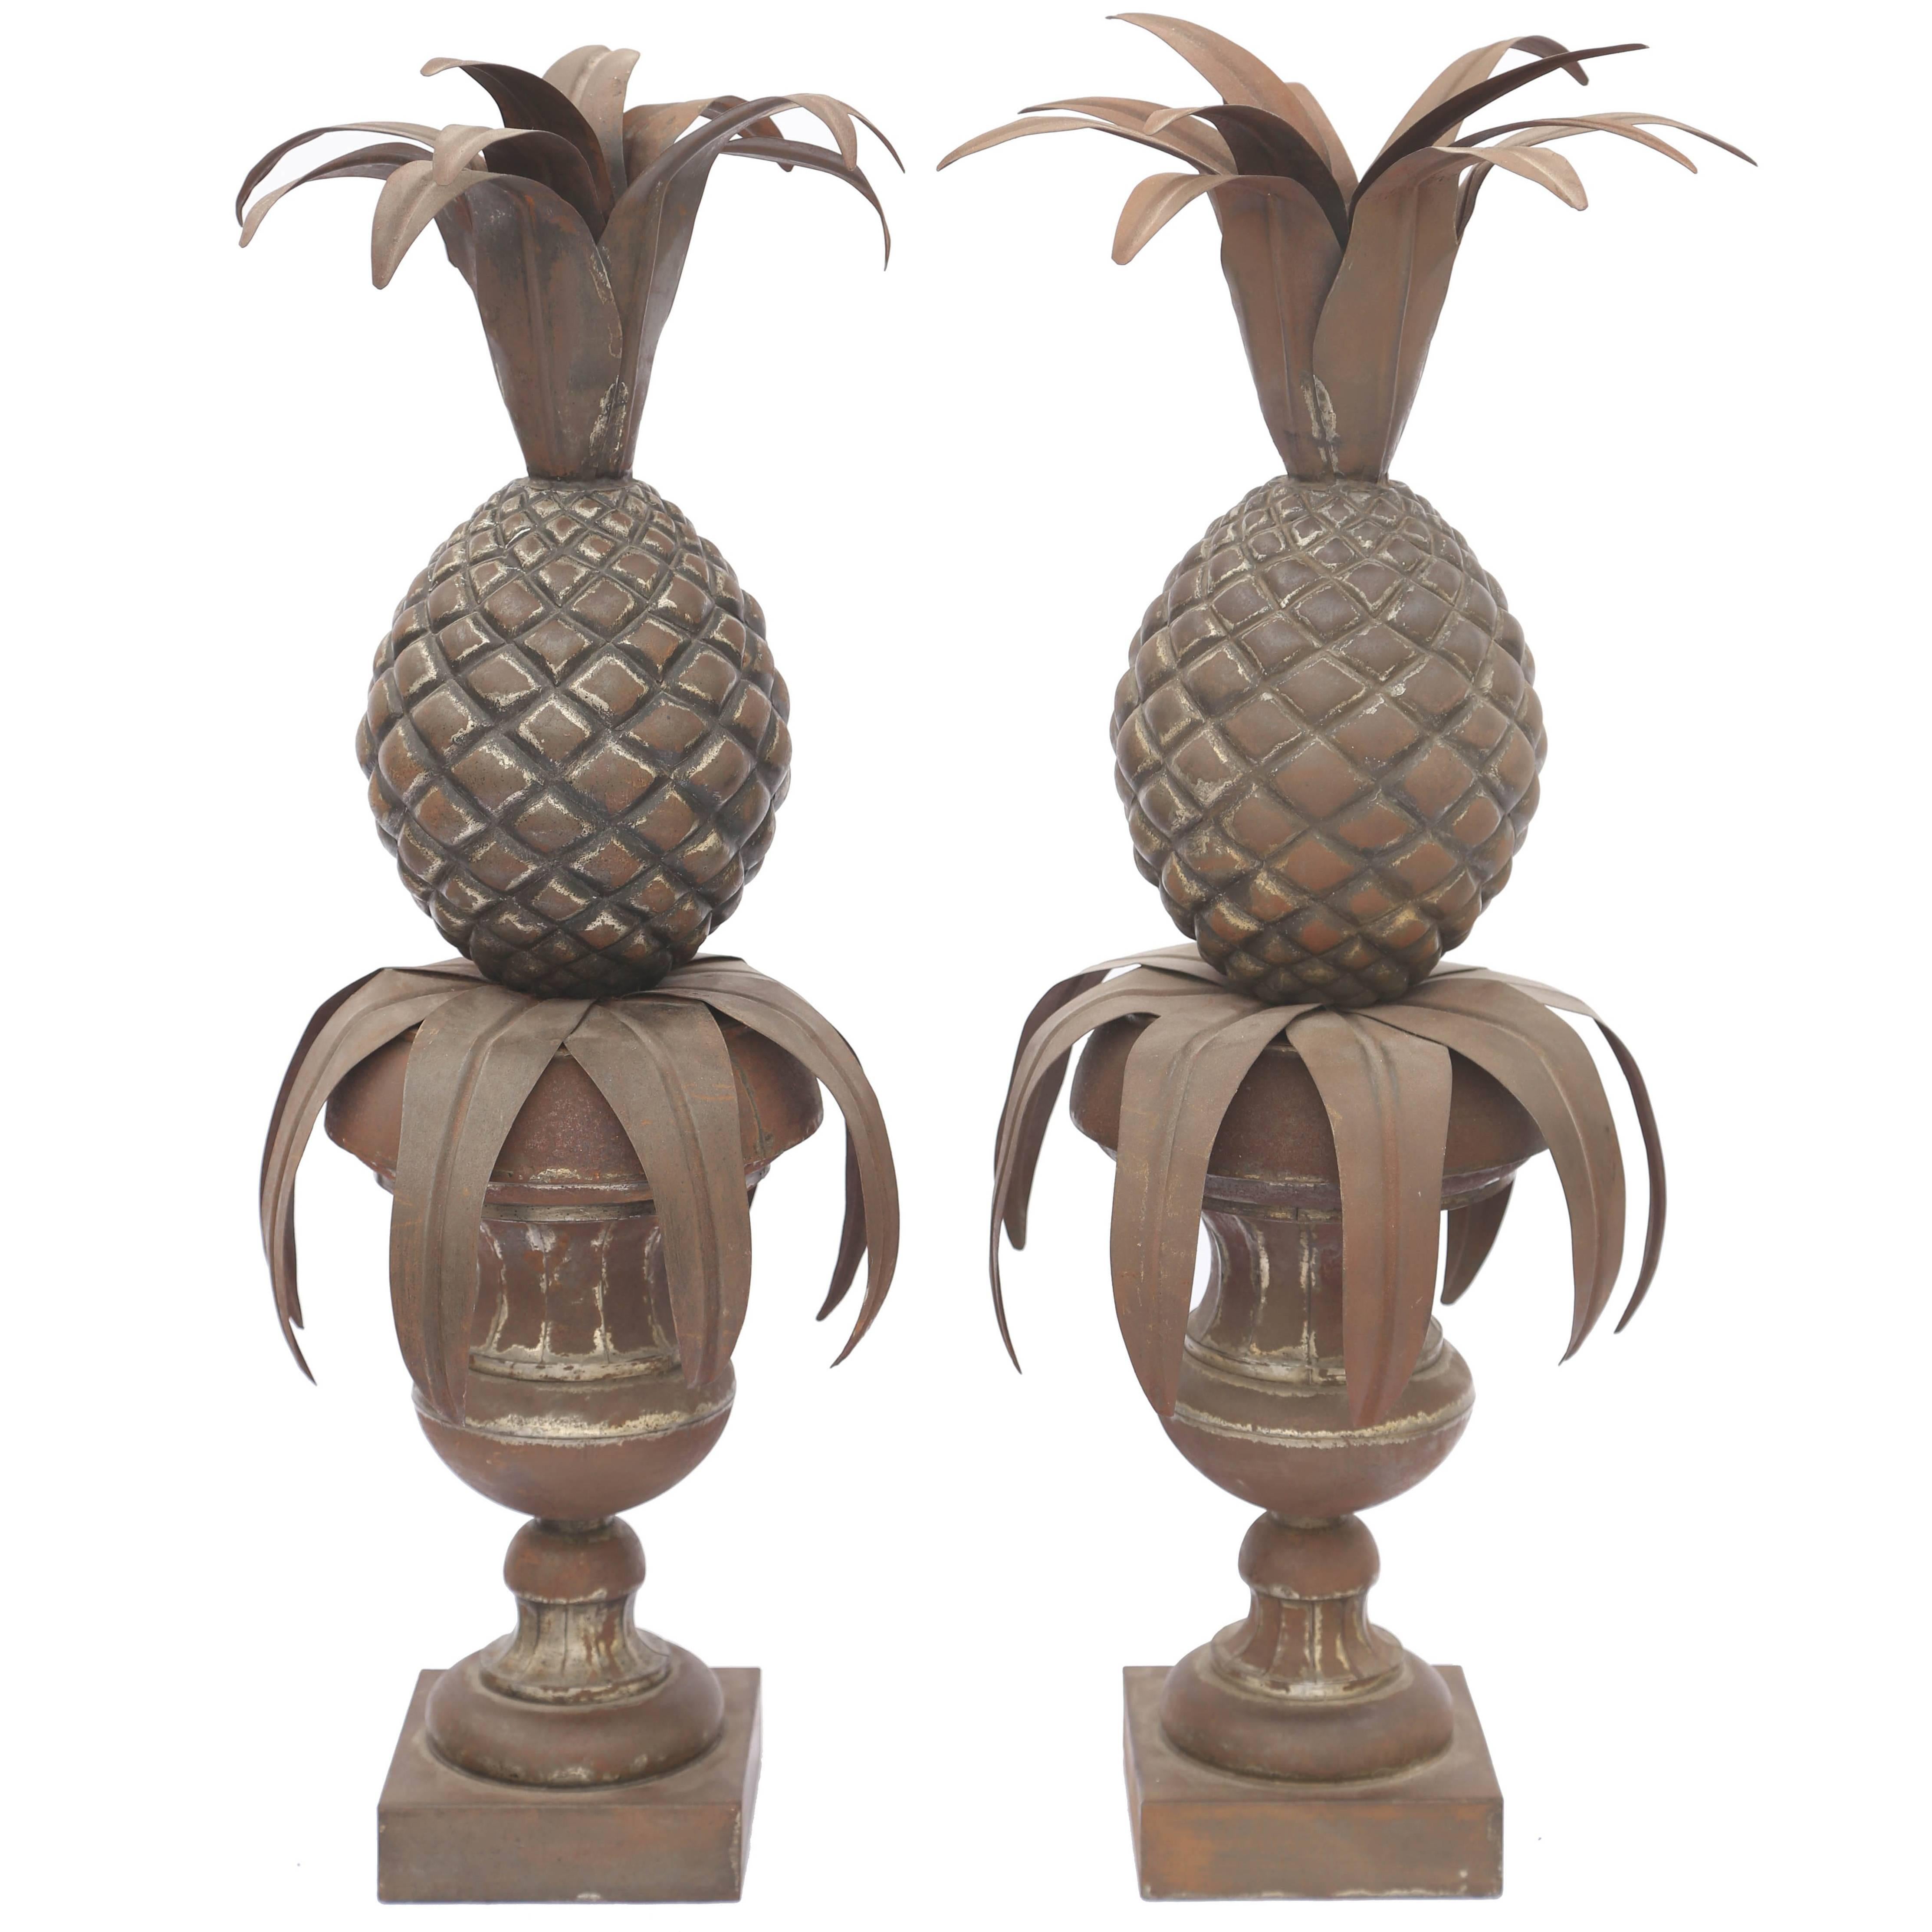 Pair of Tole Pineapples in Urns